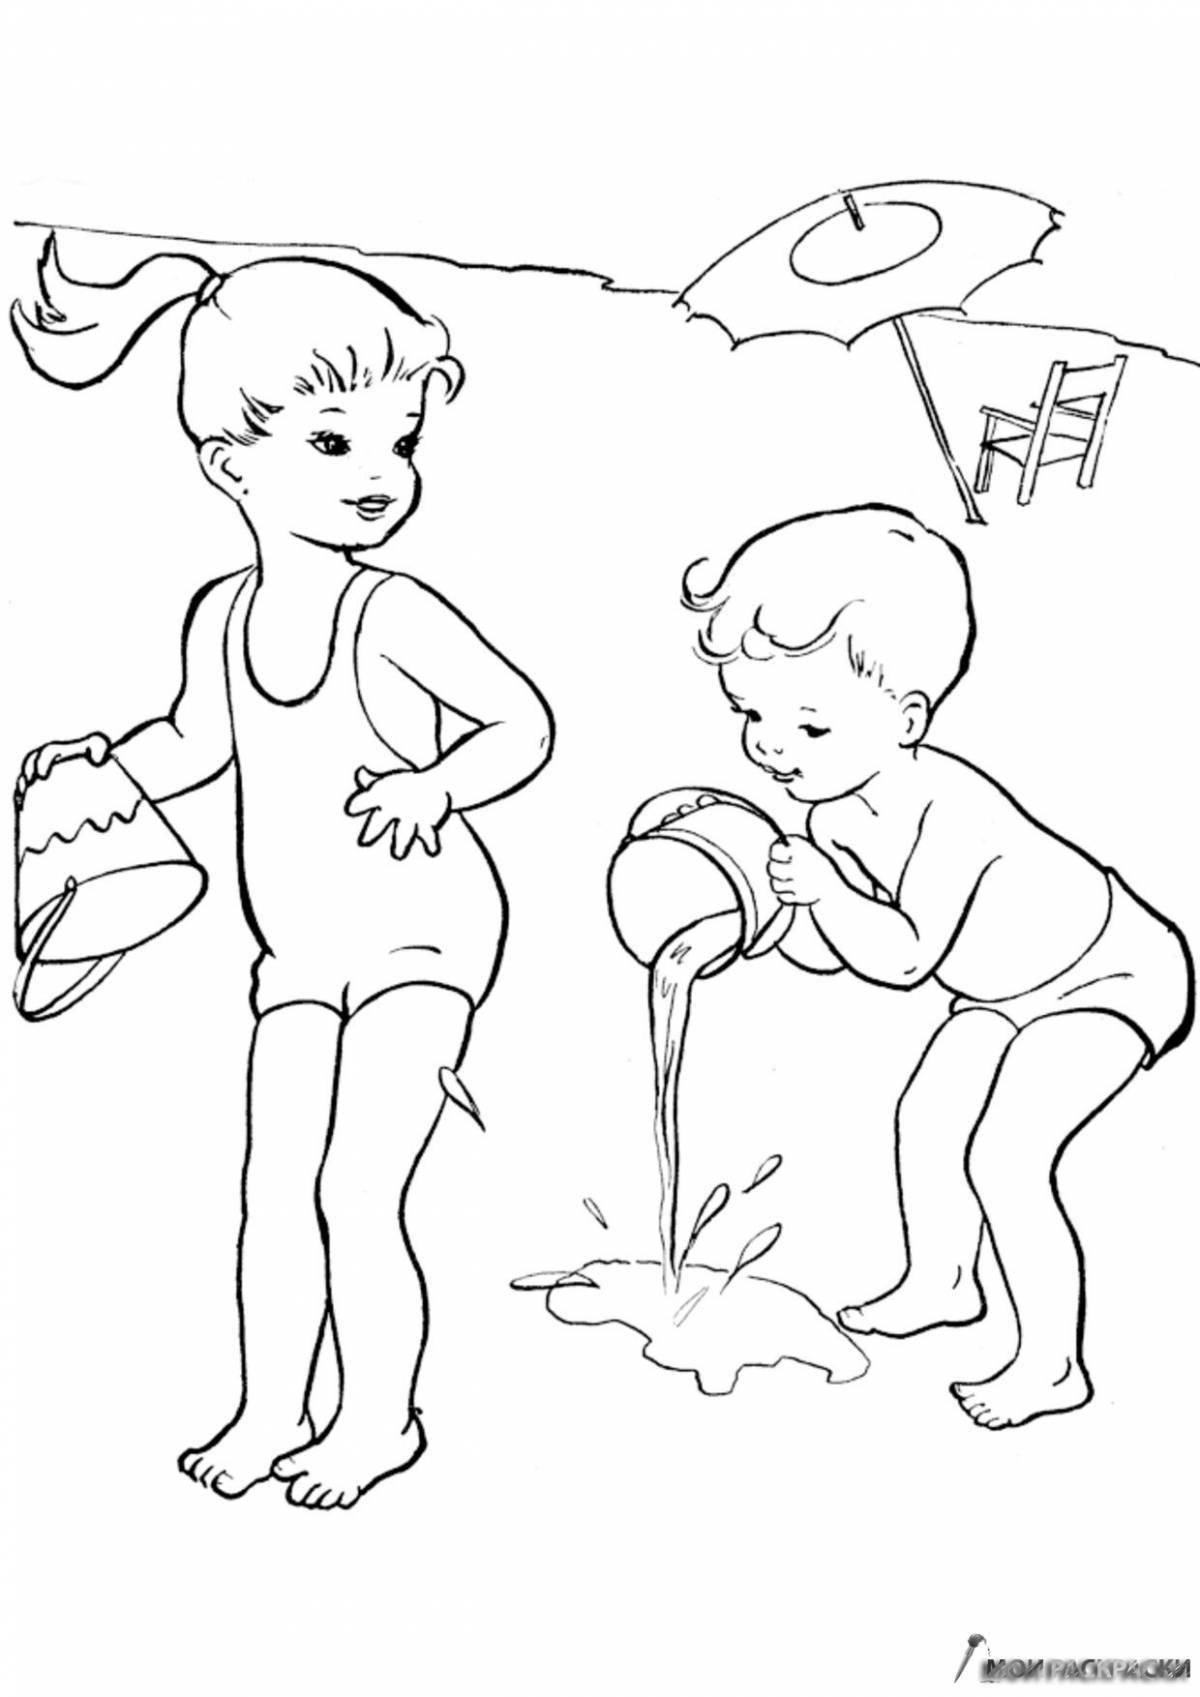 Peaceful summer coloring page